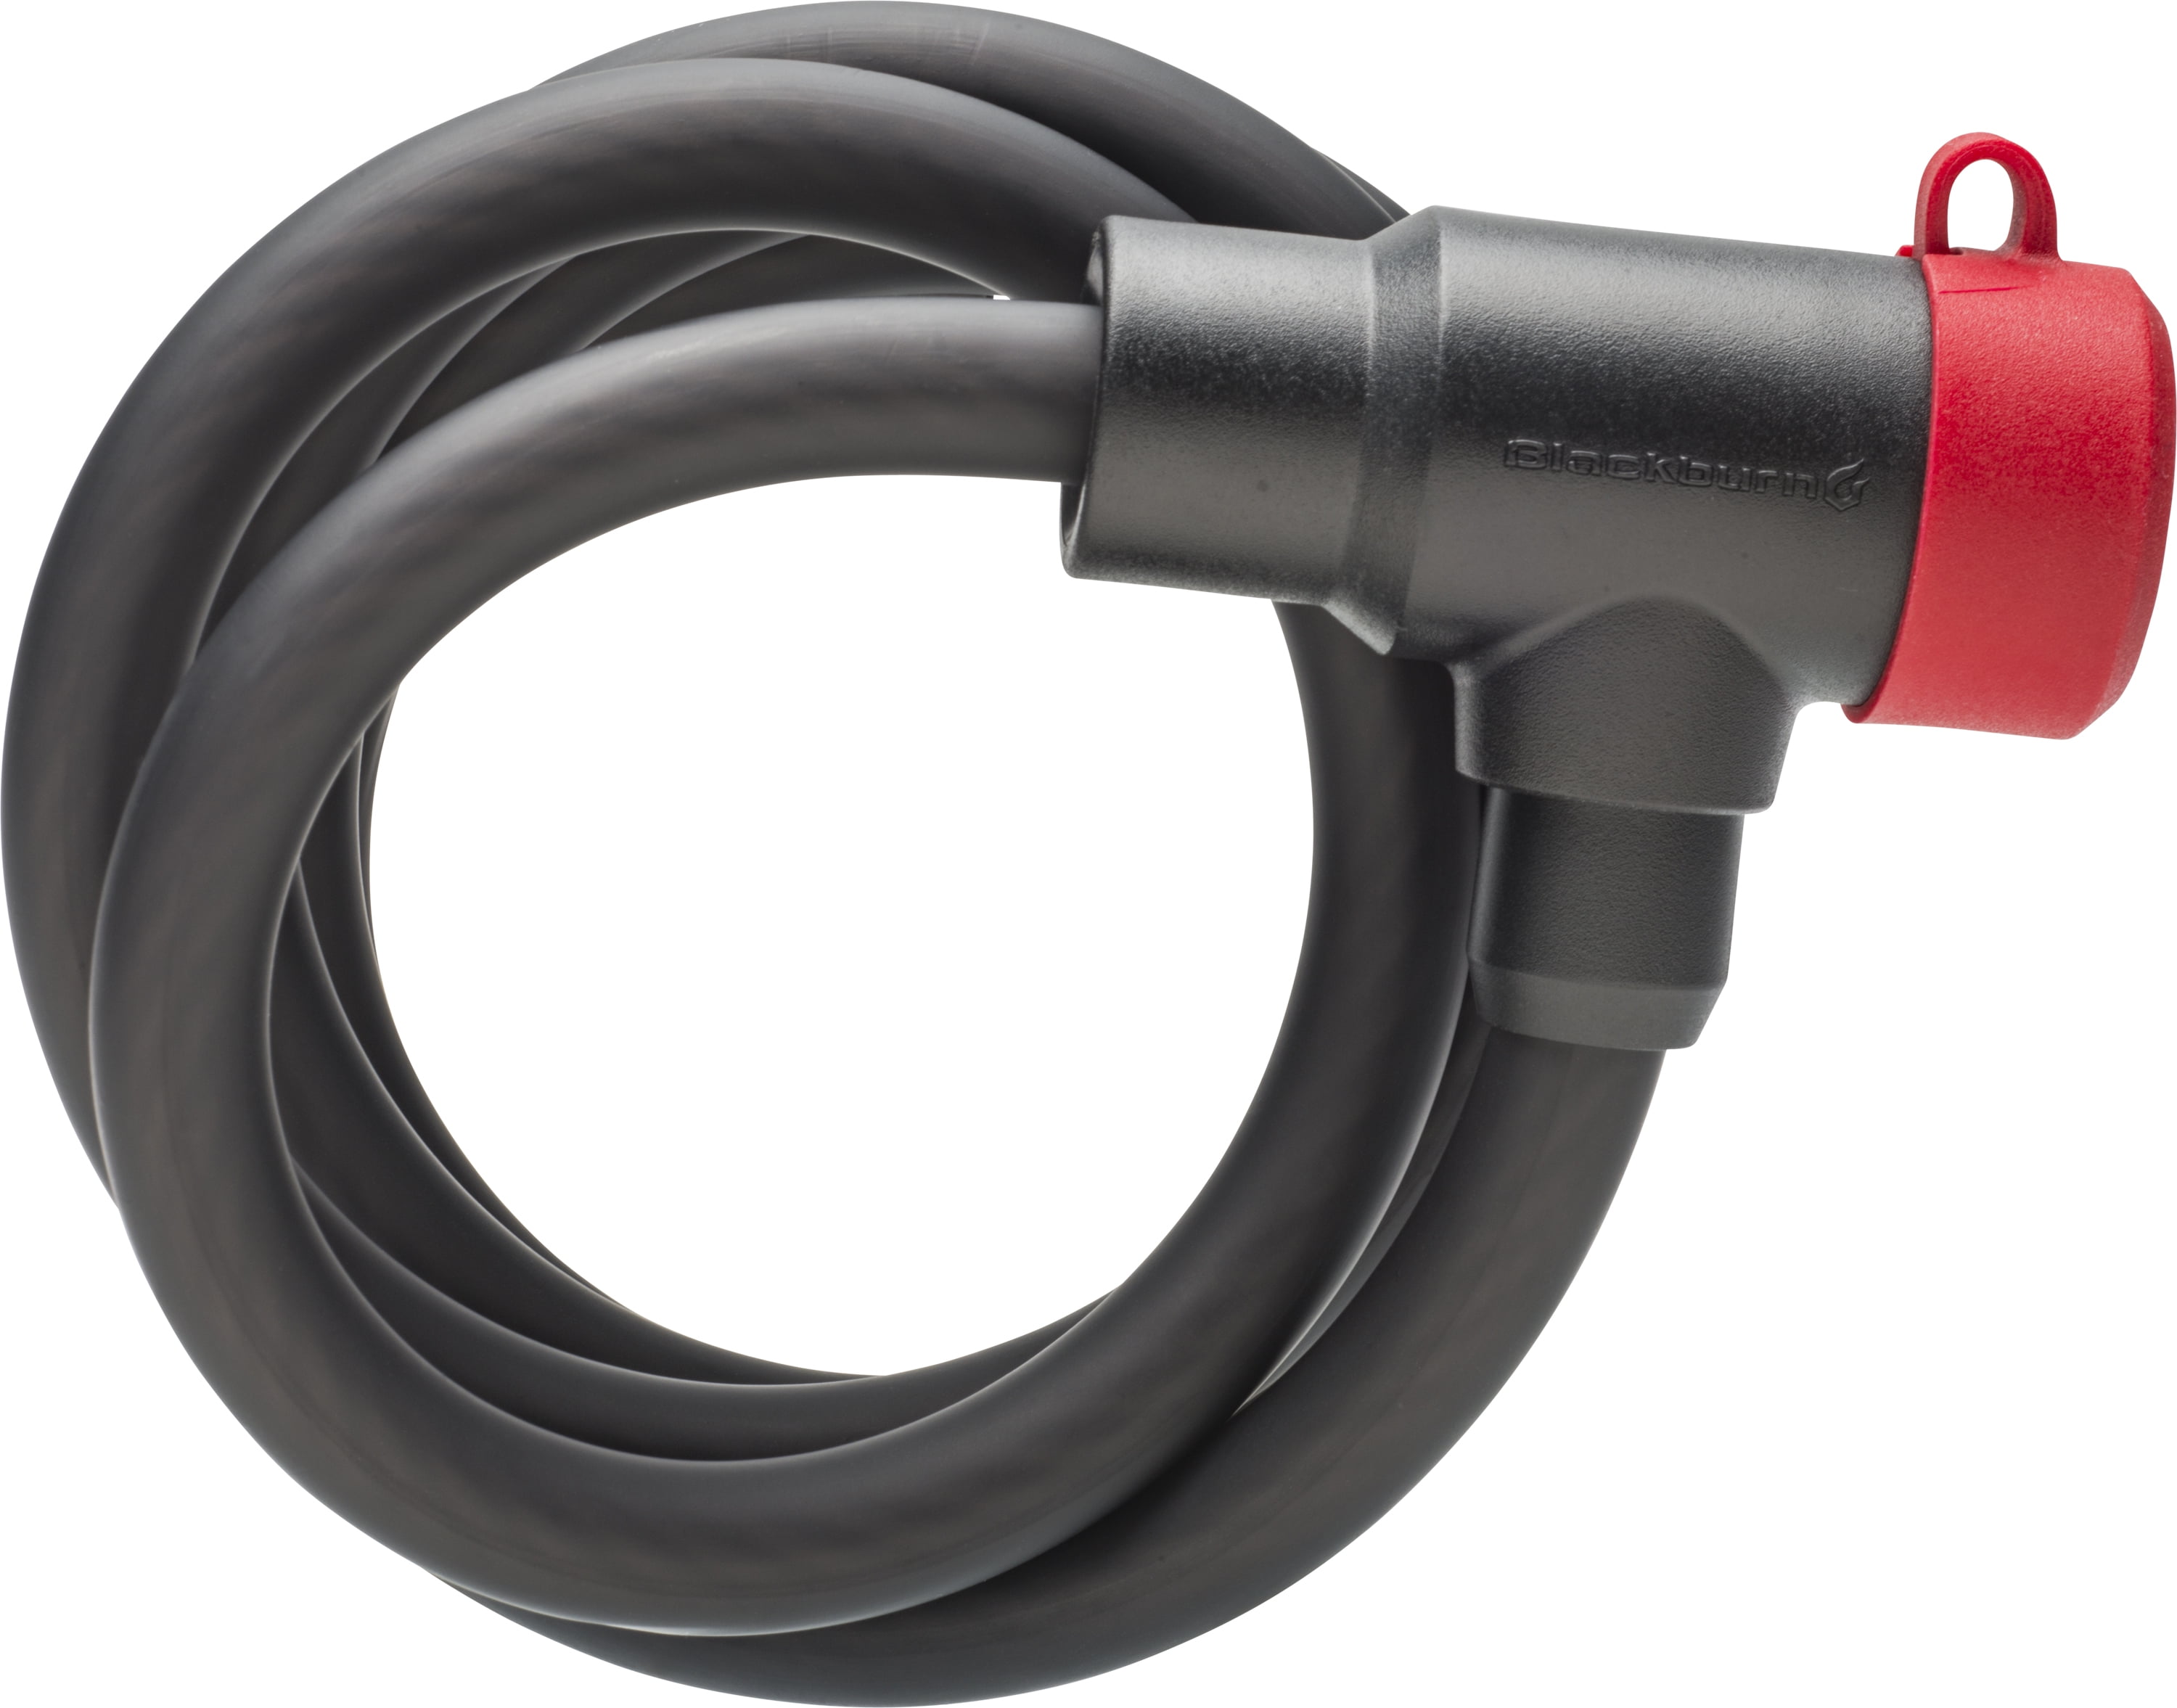 Blackburn 6 ft. Key and Cable Bicycle Lock, Black